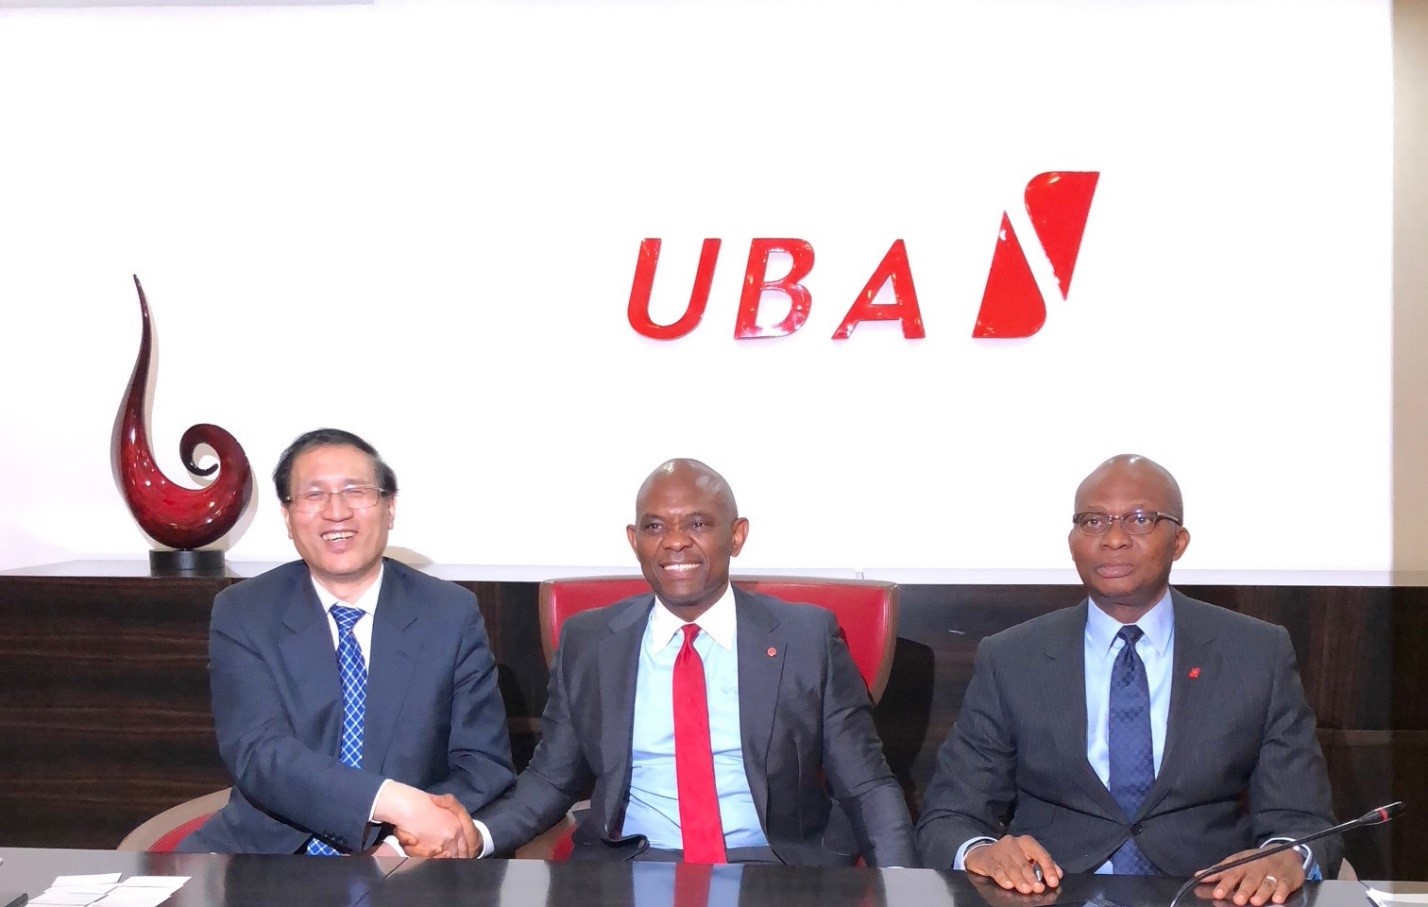 UBA and the China Development Bank has signed a $100 million deal that will  assist SMEs